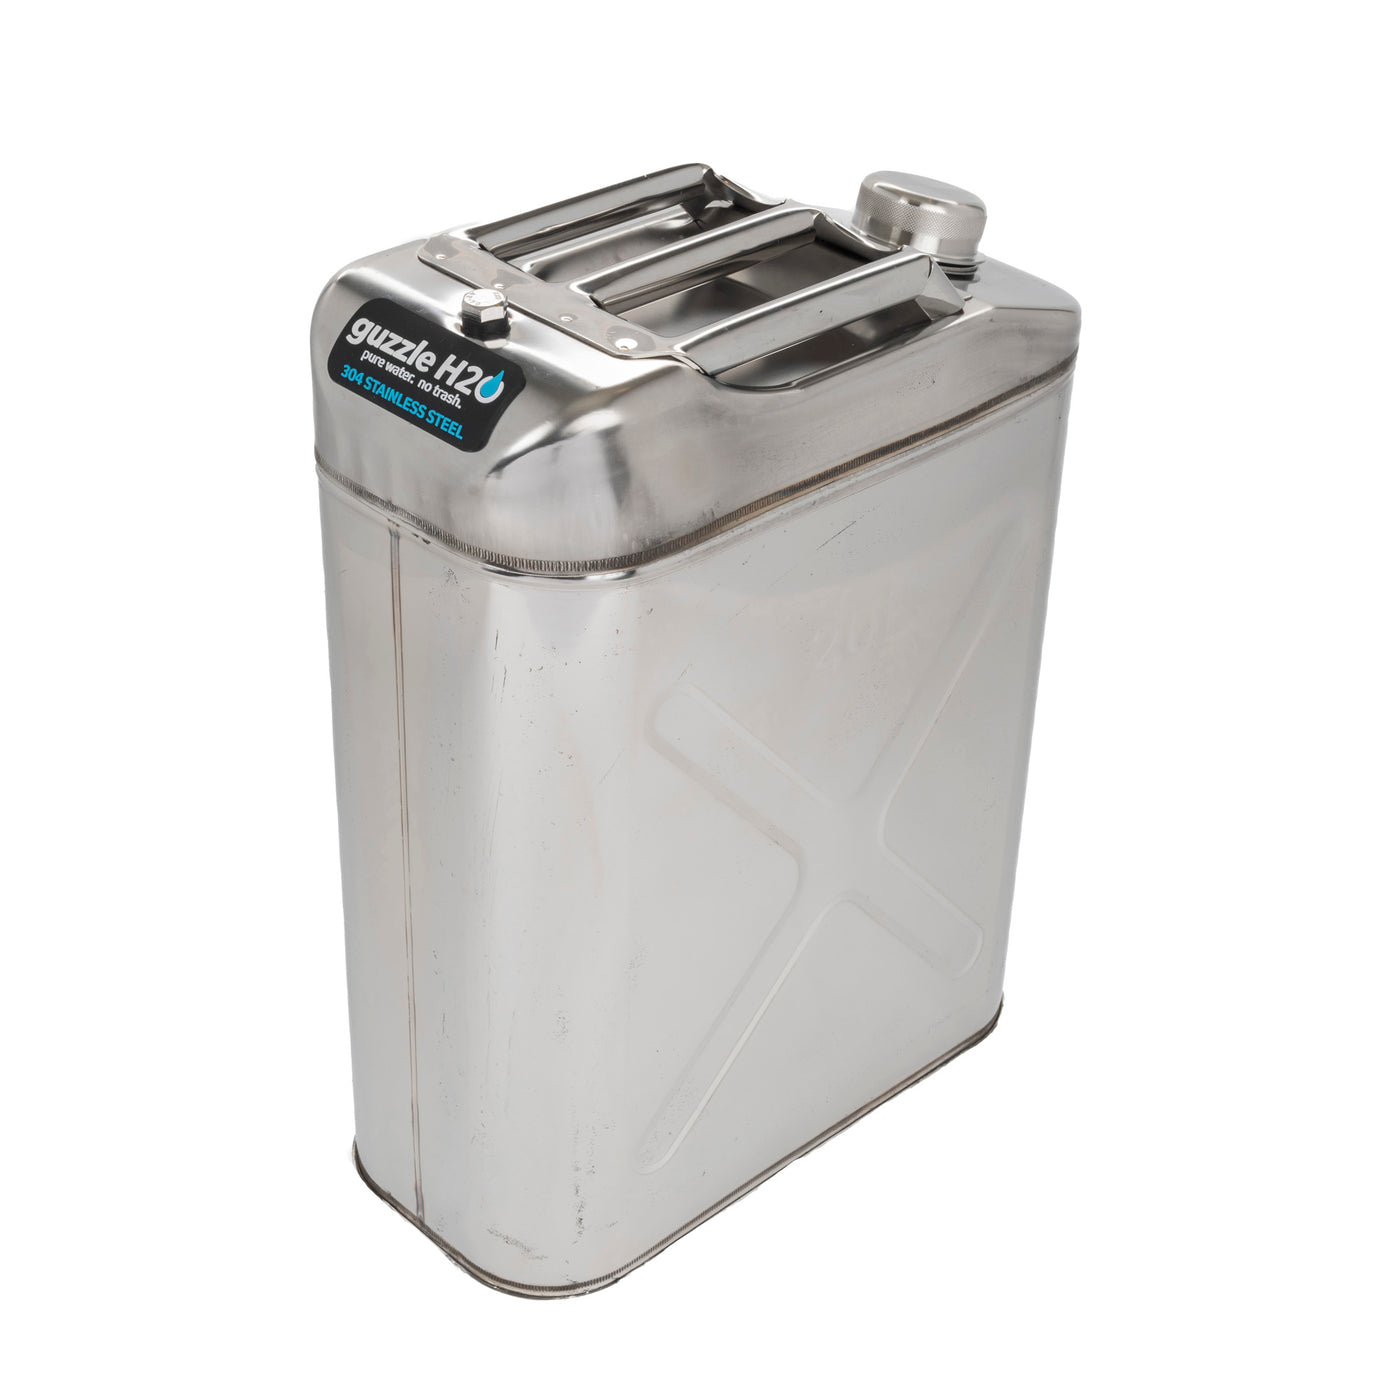 Guzzle H2O Stainless Steel Jerry Can